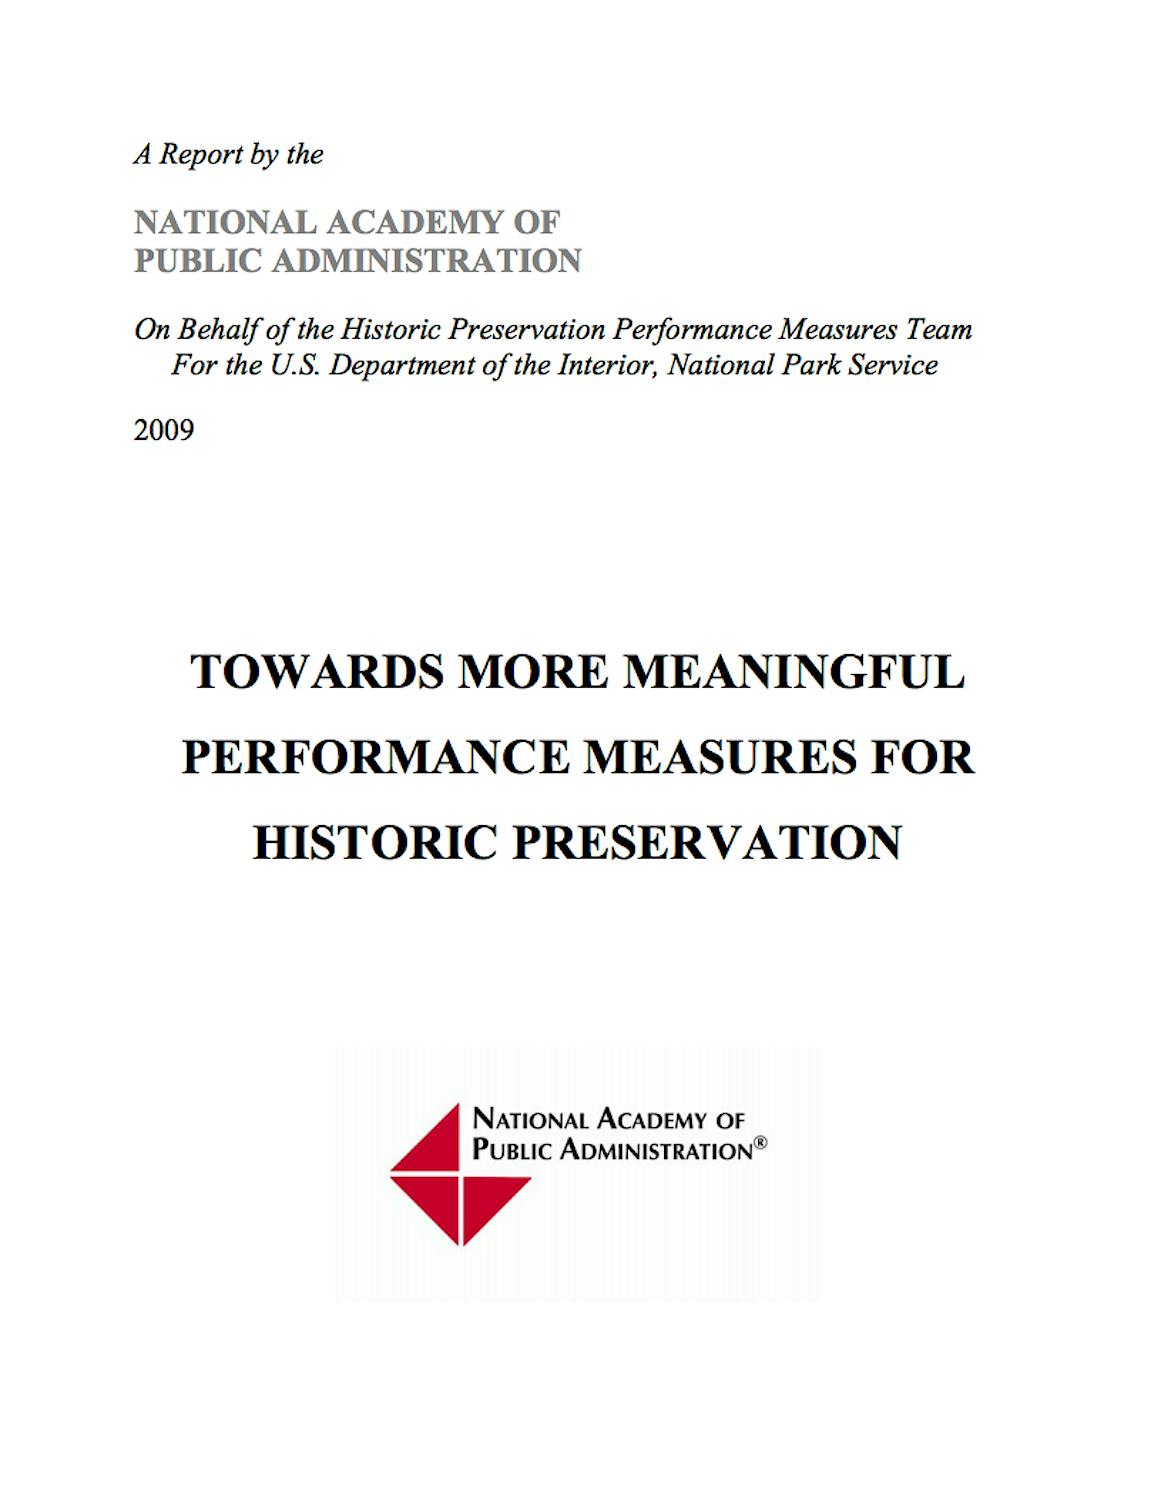 Towards More Meaningful Performance Measures for Historic Preservation